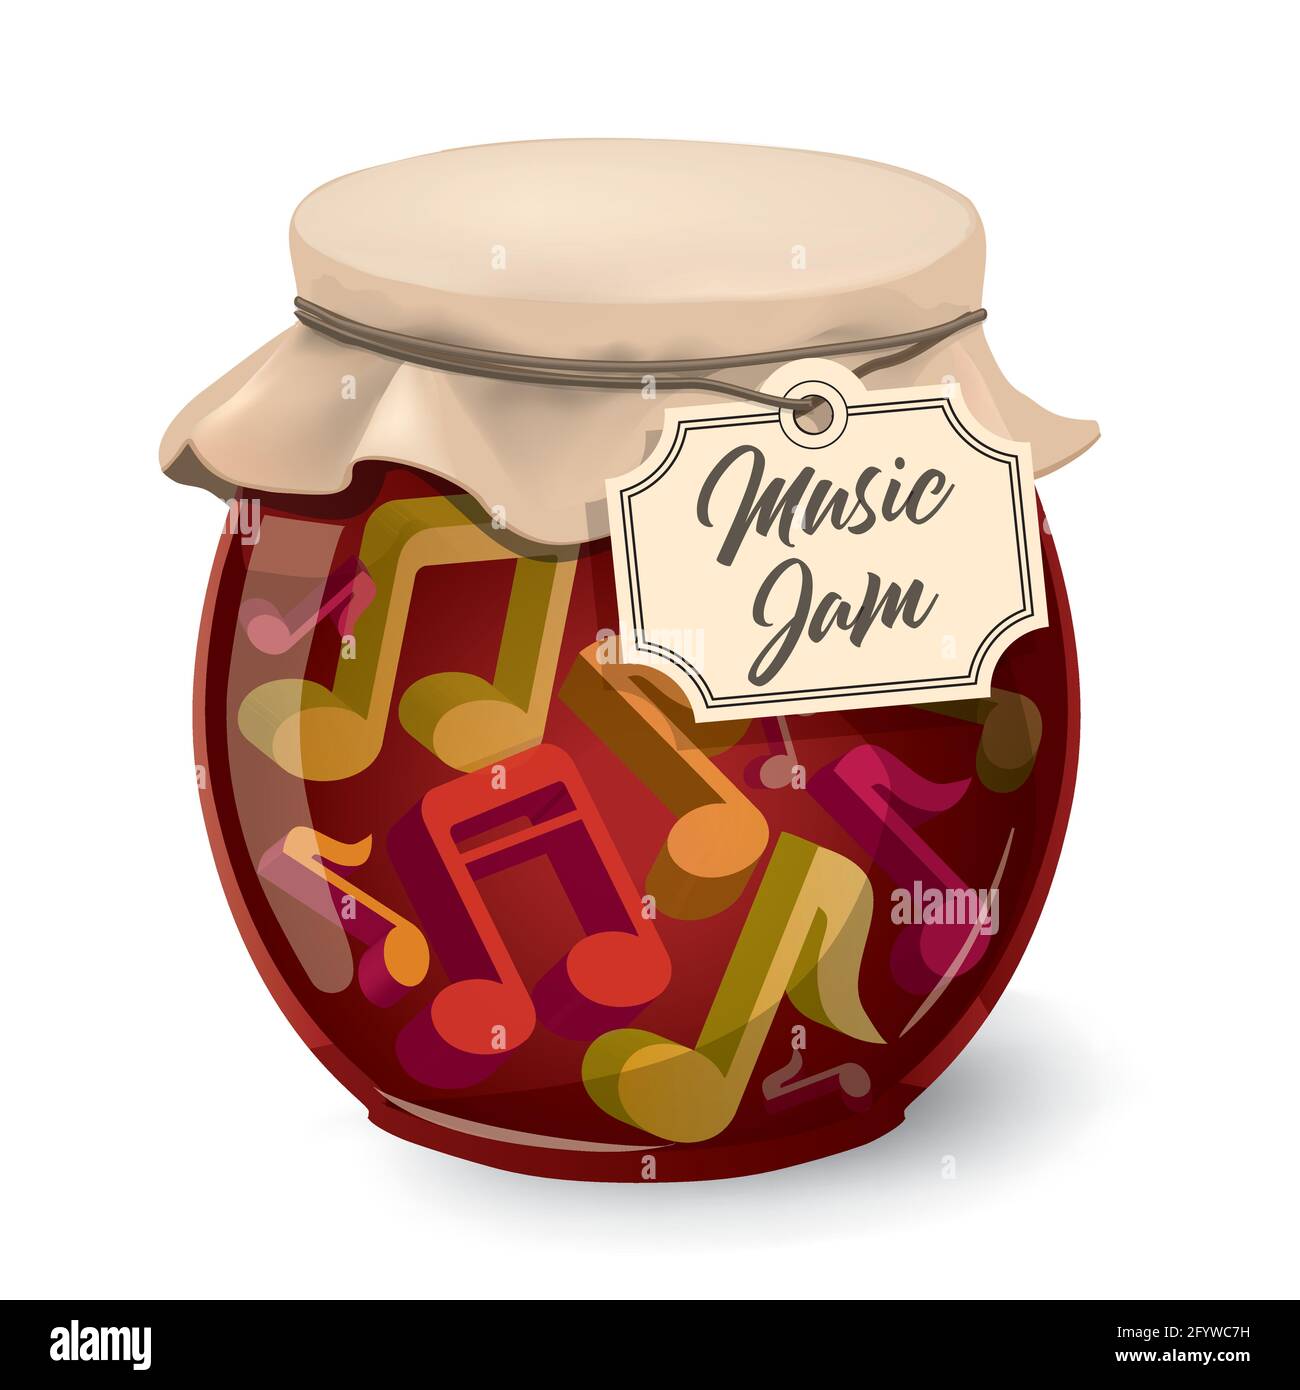 Music jam, jam session, Funny vintage concept.  Illustration of jam glass jar with music notes 3d symbols and label with text Music Jam. Stock Vector